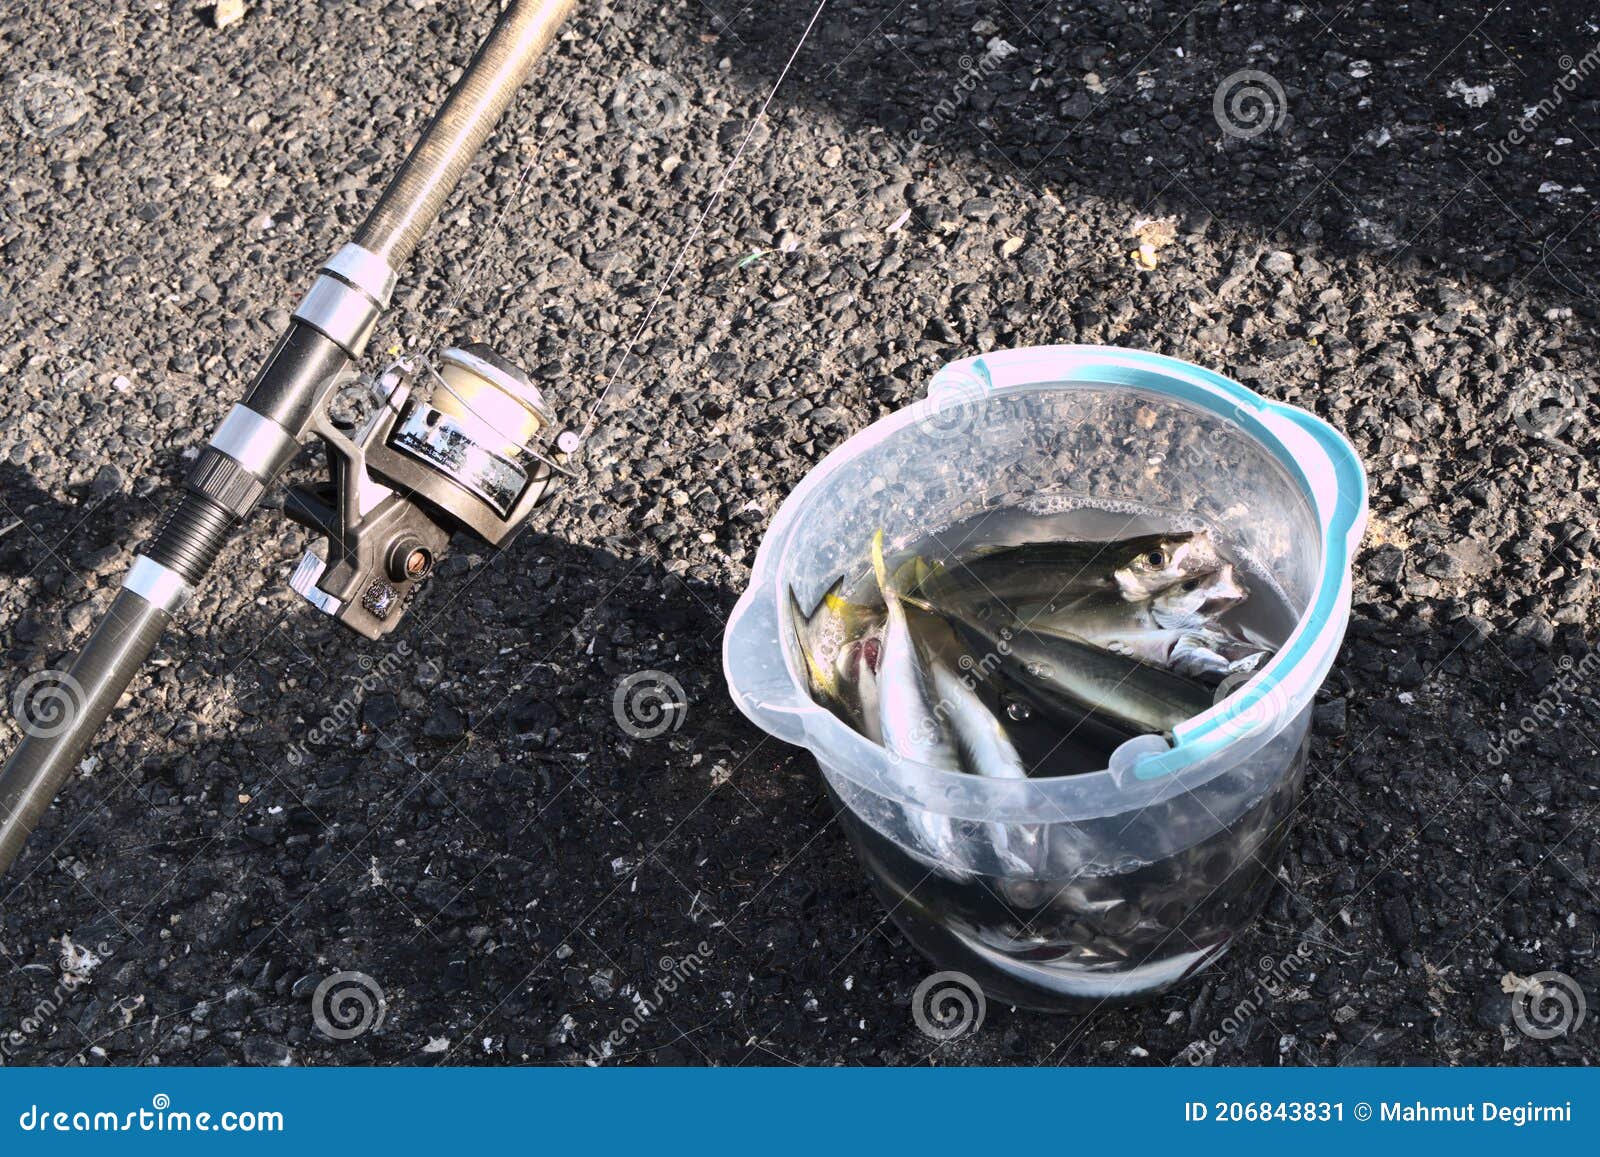 A Few Horse Mackerel Fish in a Bucket and Fishing Road Stock Image